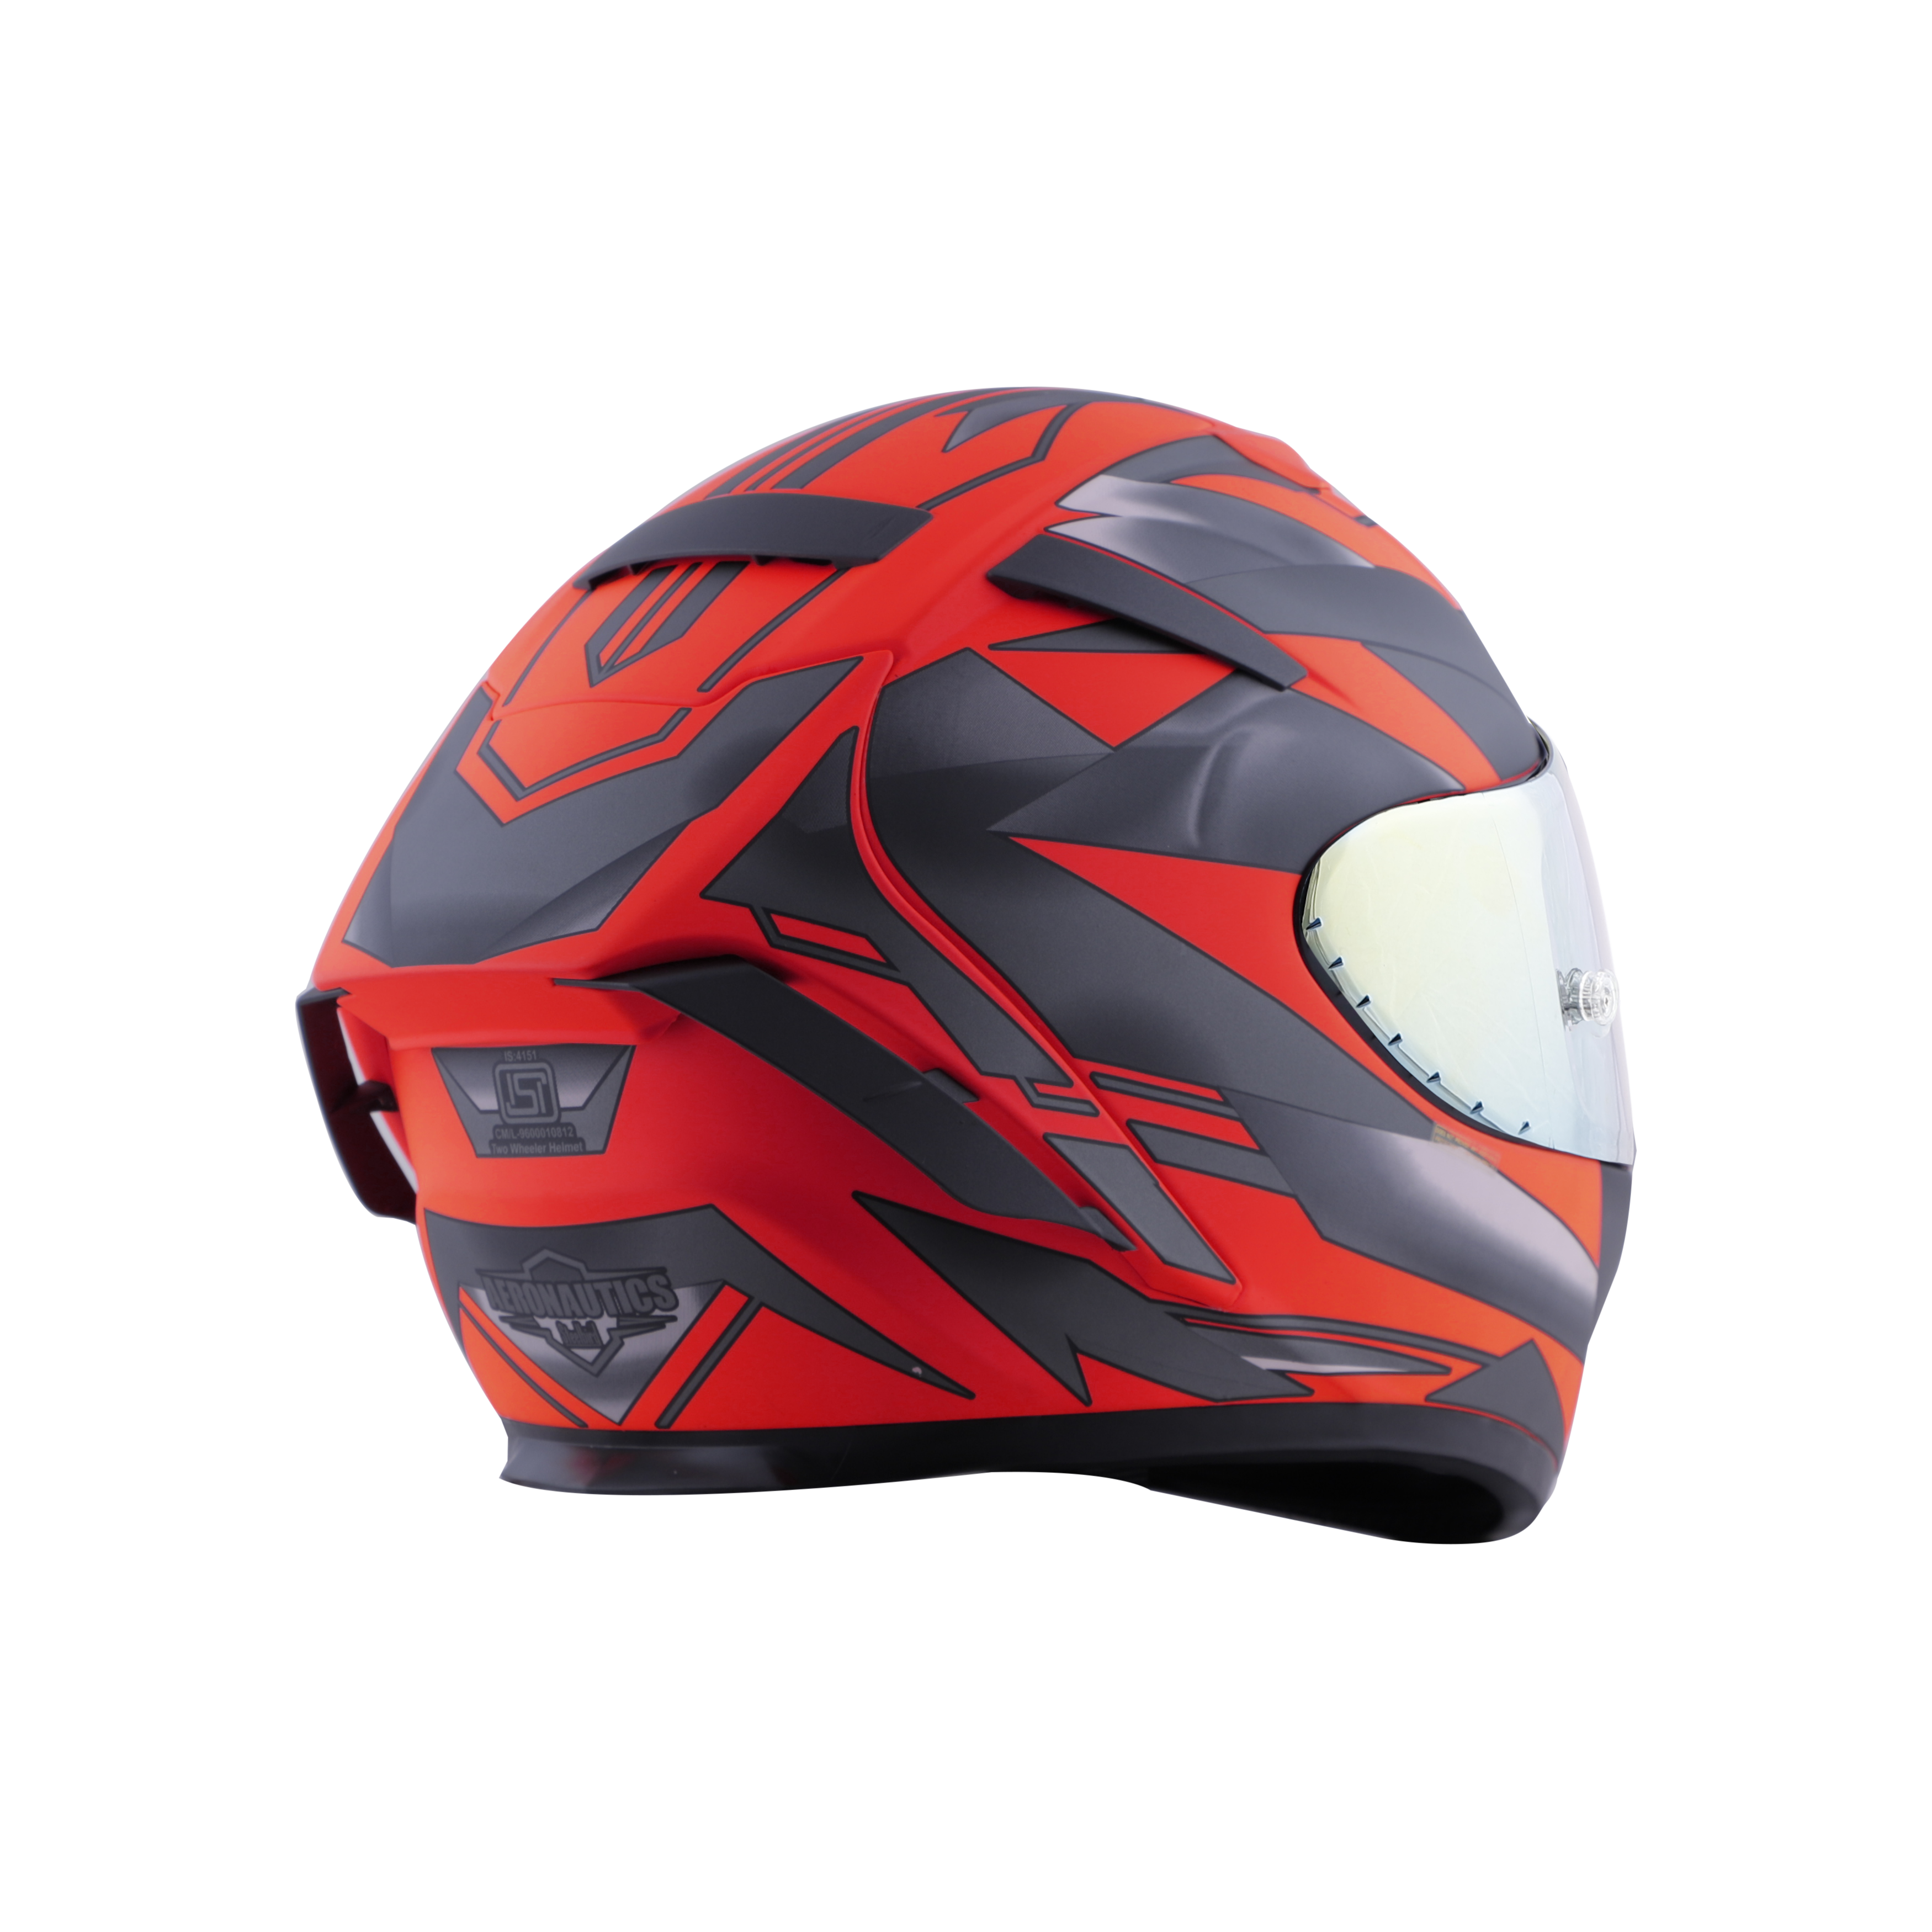 SA-2 METALLIC GLOSSY FLUO RED WITH GREY ( FITTED WITH CLEAR VISOR  EXTRA CHROME GOLD VISOR FREE) WITH ANTI-FOG SHIELD HOLDER